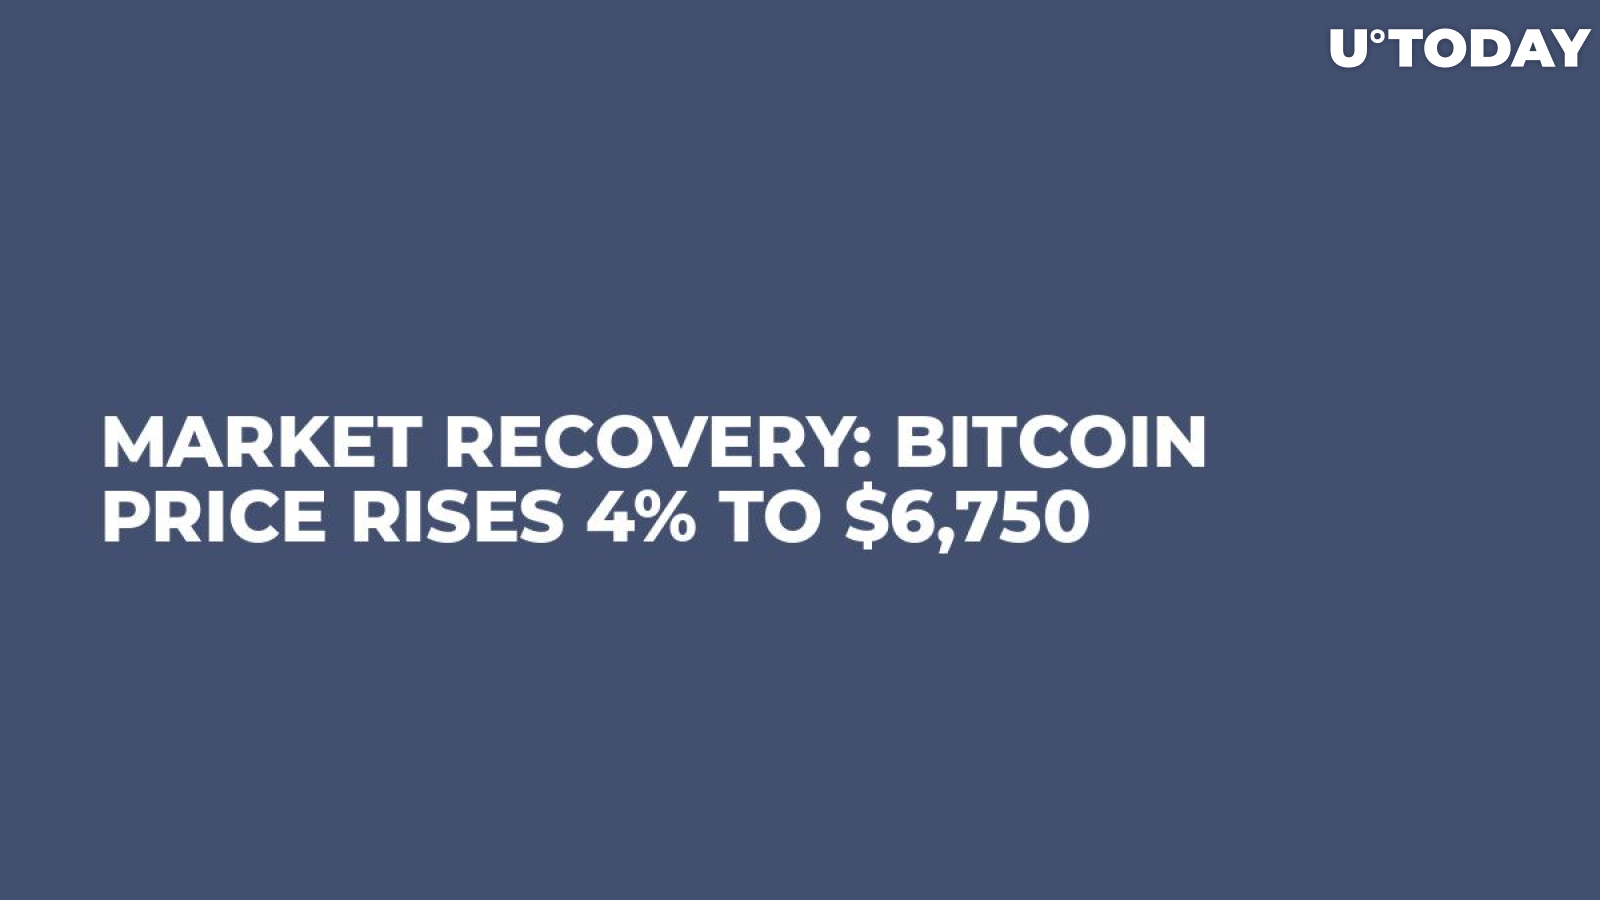 Market Recovery: Bitcoin Price Rises 4% To $6,750